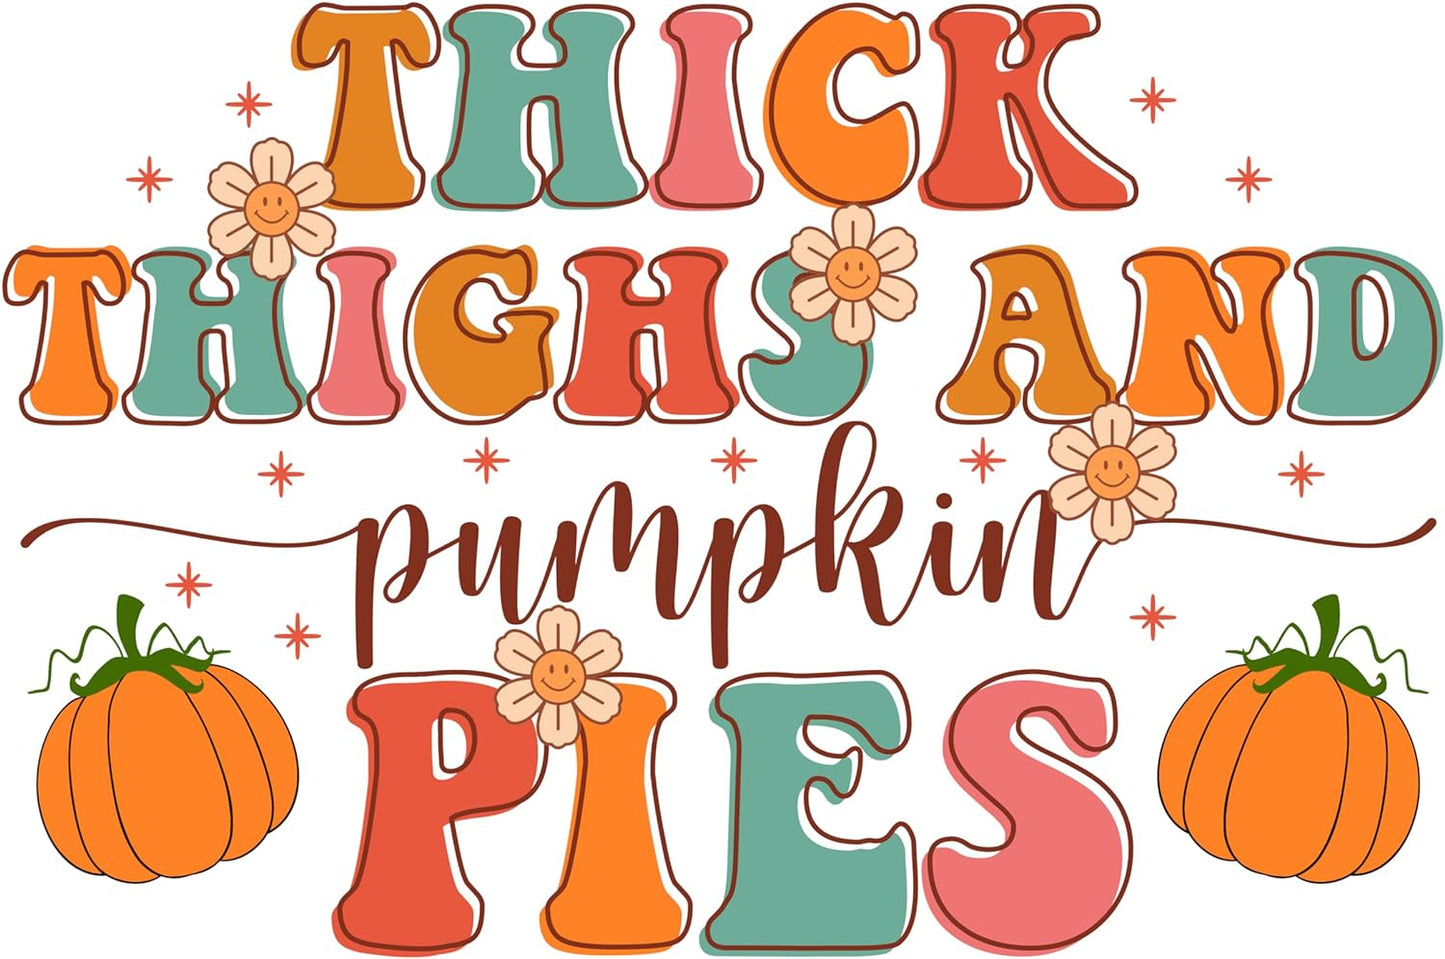 Inspirational Quote Thick Things And Pumpkins Motivational Sticker Vinyl Decal Motivation Stickers- 5" Vinyl Sticker Waterproof